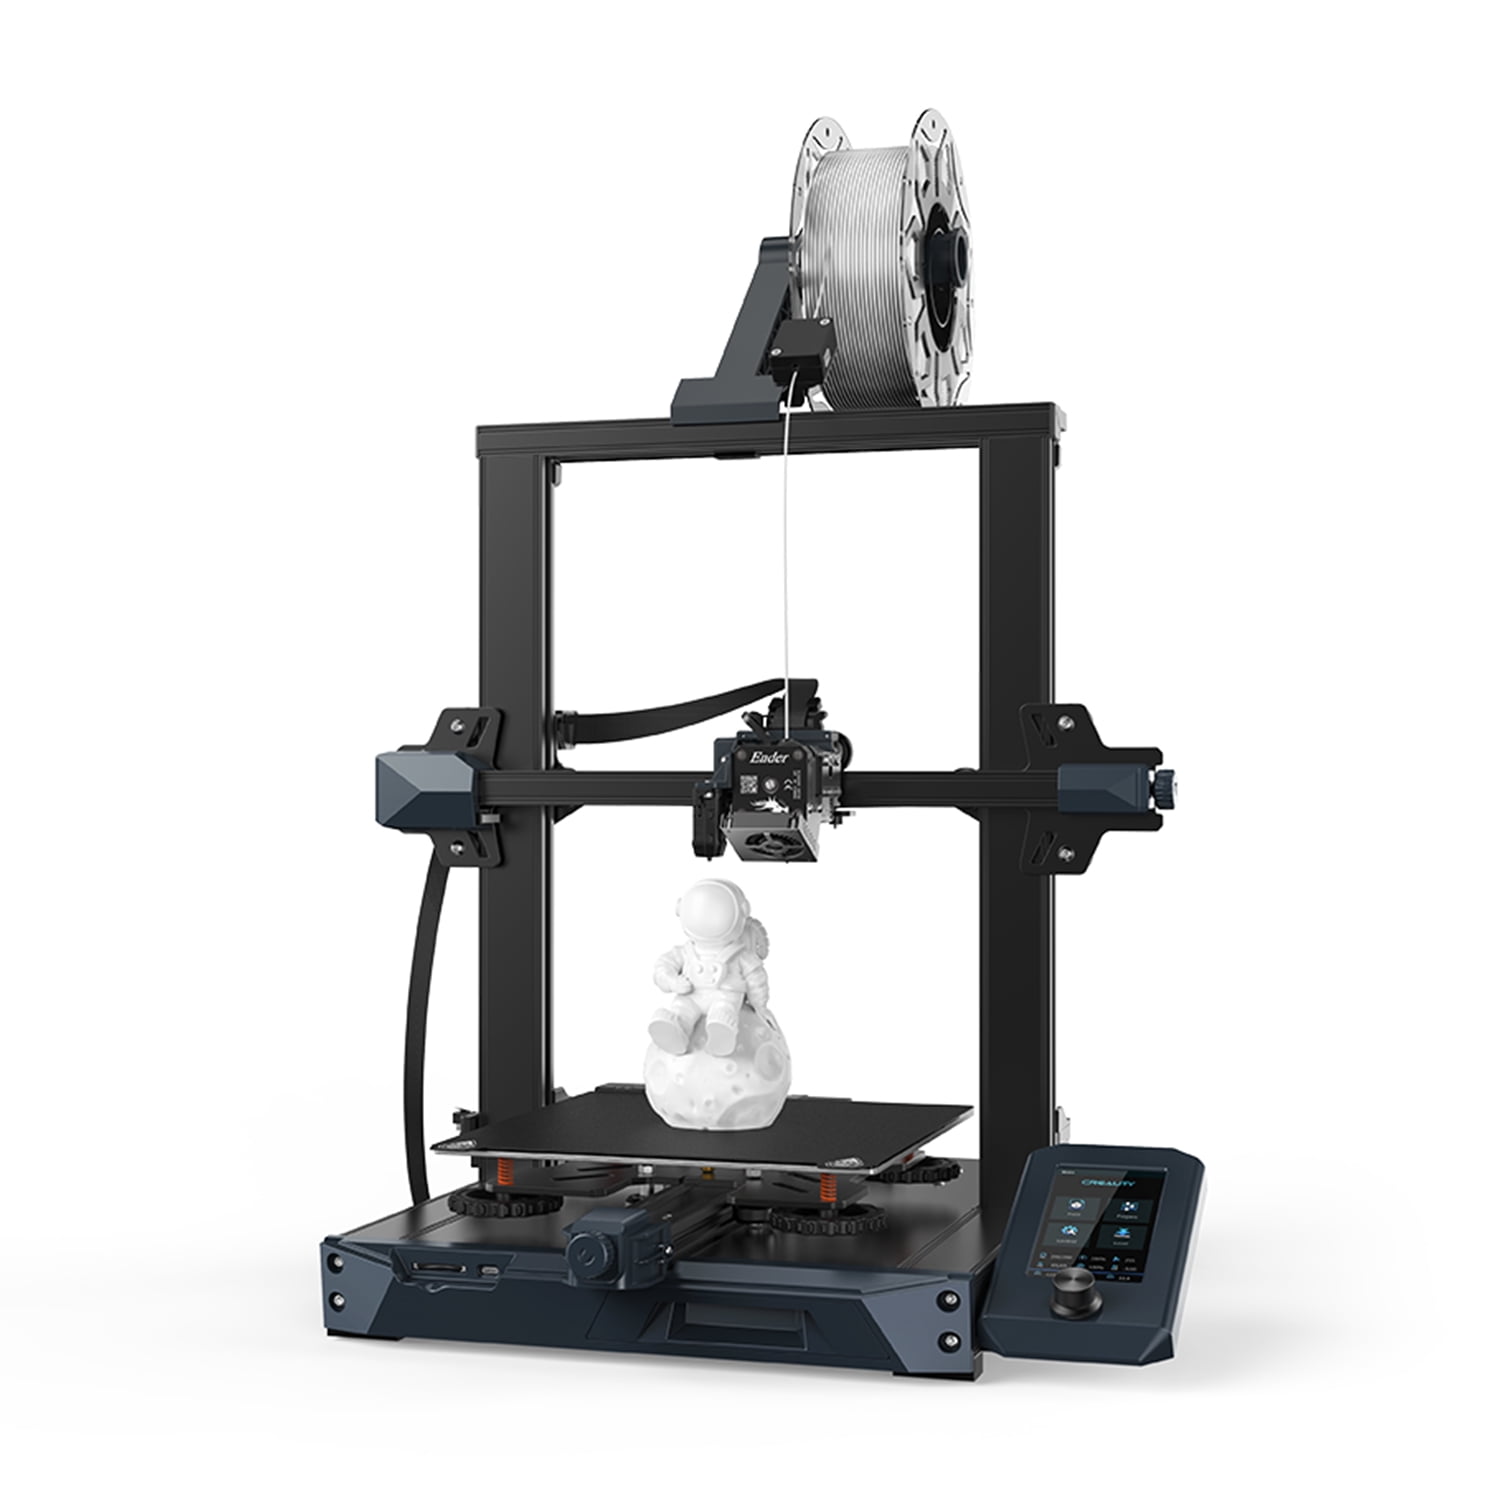 Creality Ender-3 Desktop 3D Printer FDM 3D Printing 220*220*270mm8.6*8.6*10.6in Build Size with Direct Extruder PC Spring Steel Printing Platform Resume Printing Function Dual Z- Compatible with PL - Walmart.com